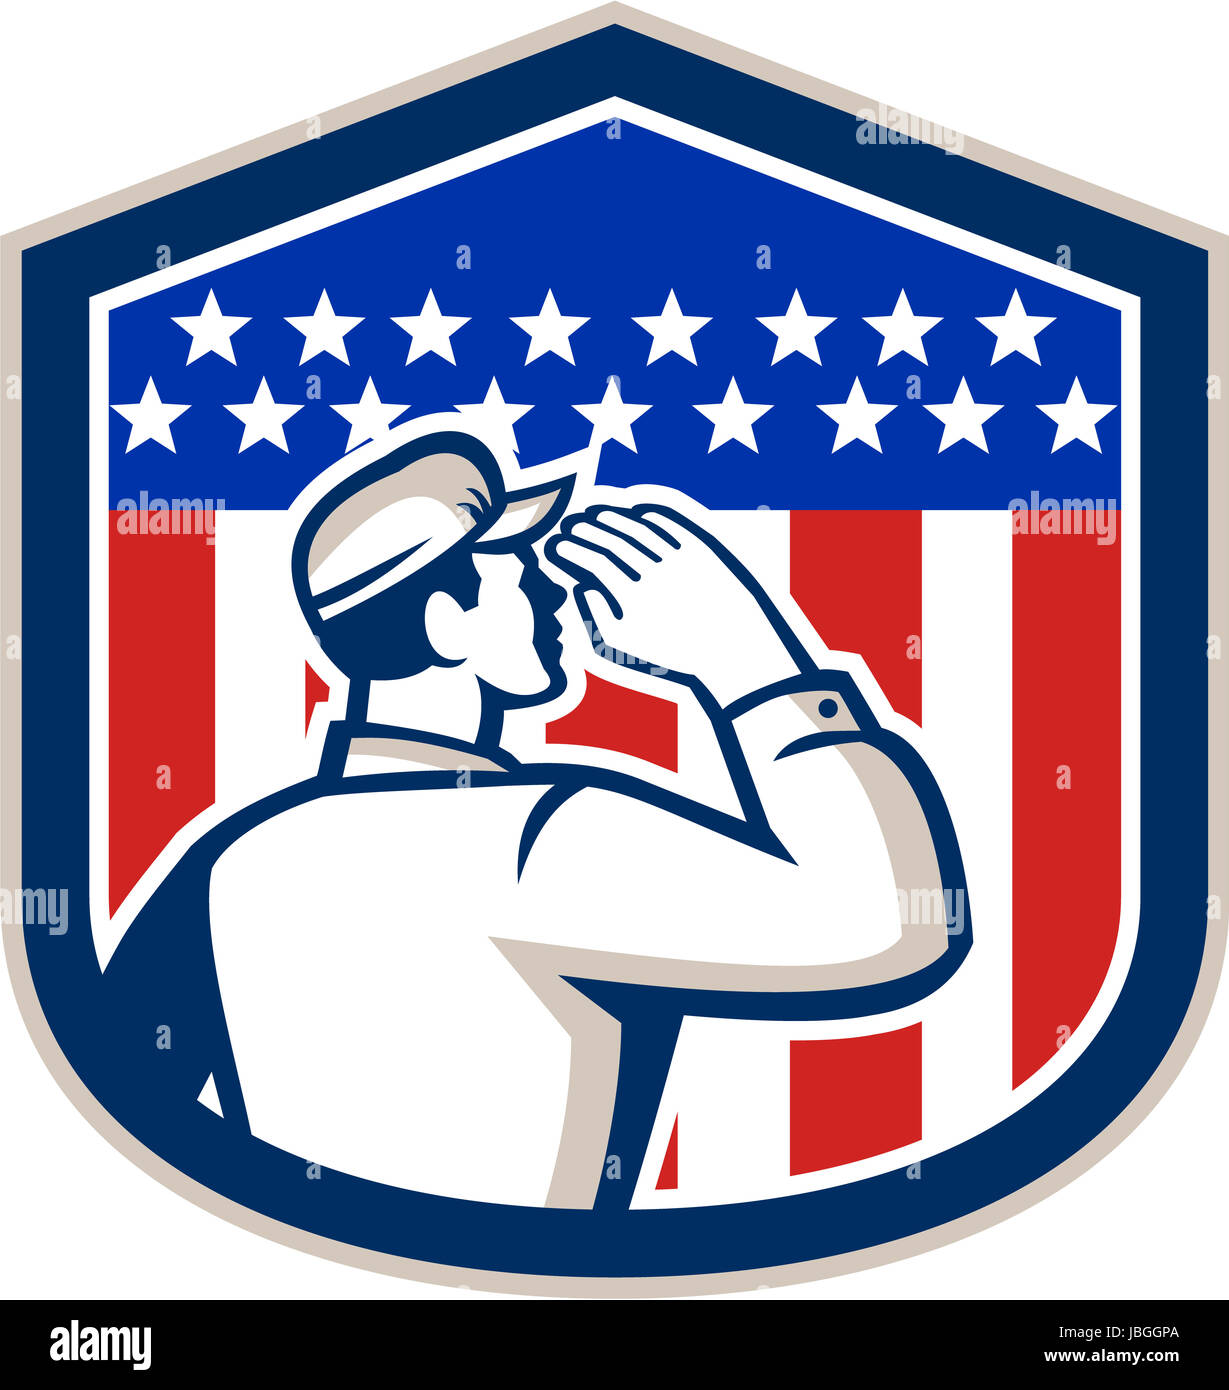 Illustration of an American soldier serviceman saluting USA stars and stripes flag viewed from rear set inside shield crest shape done in retro style. Stock Photo